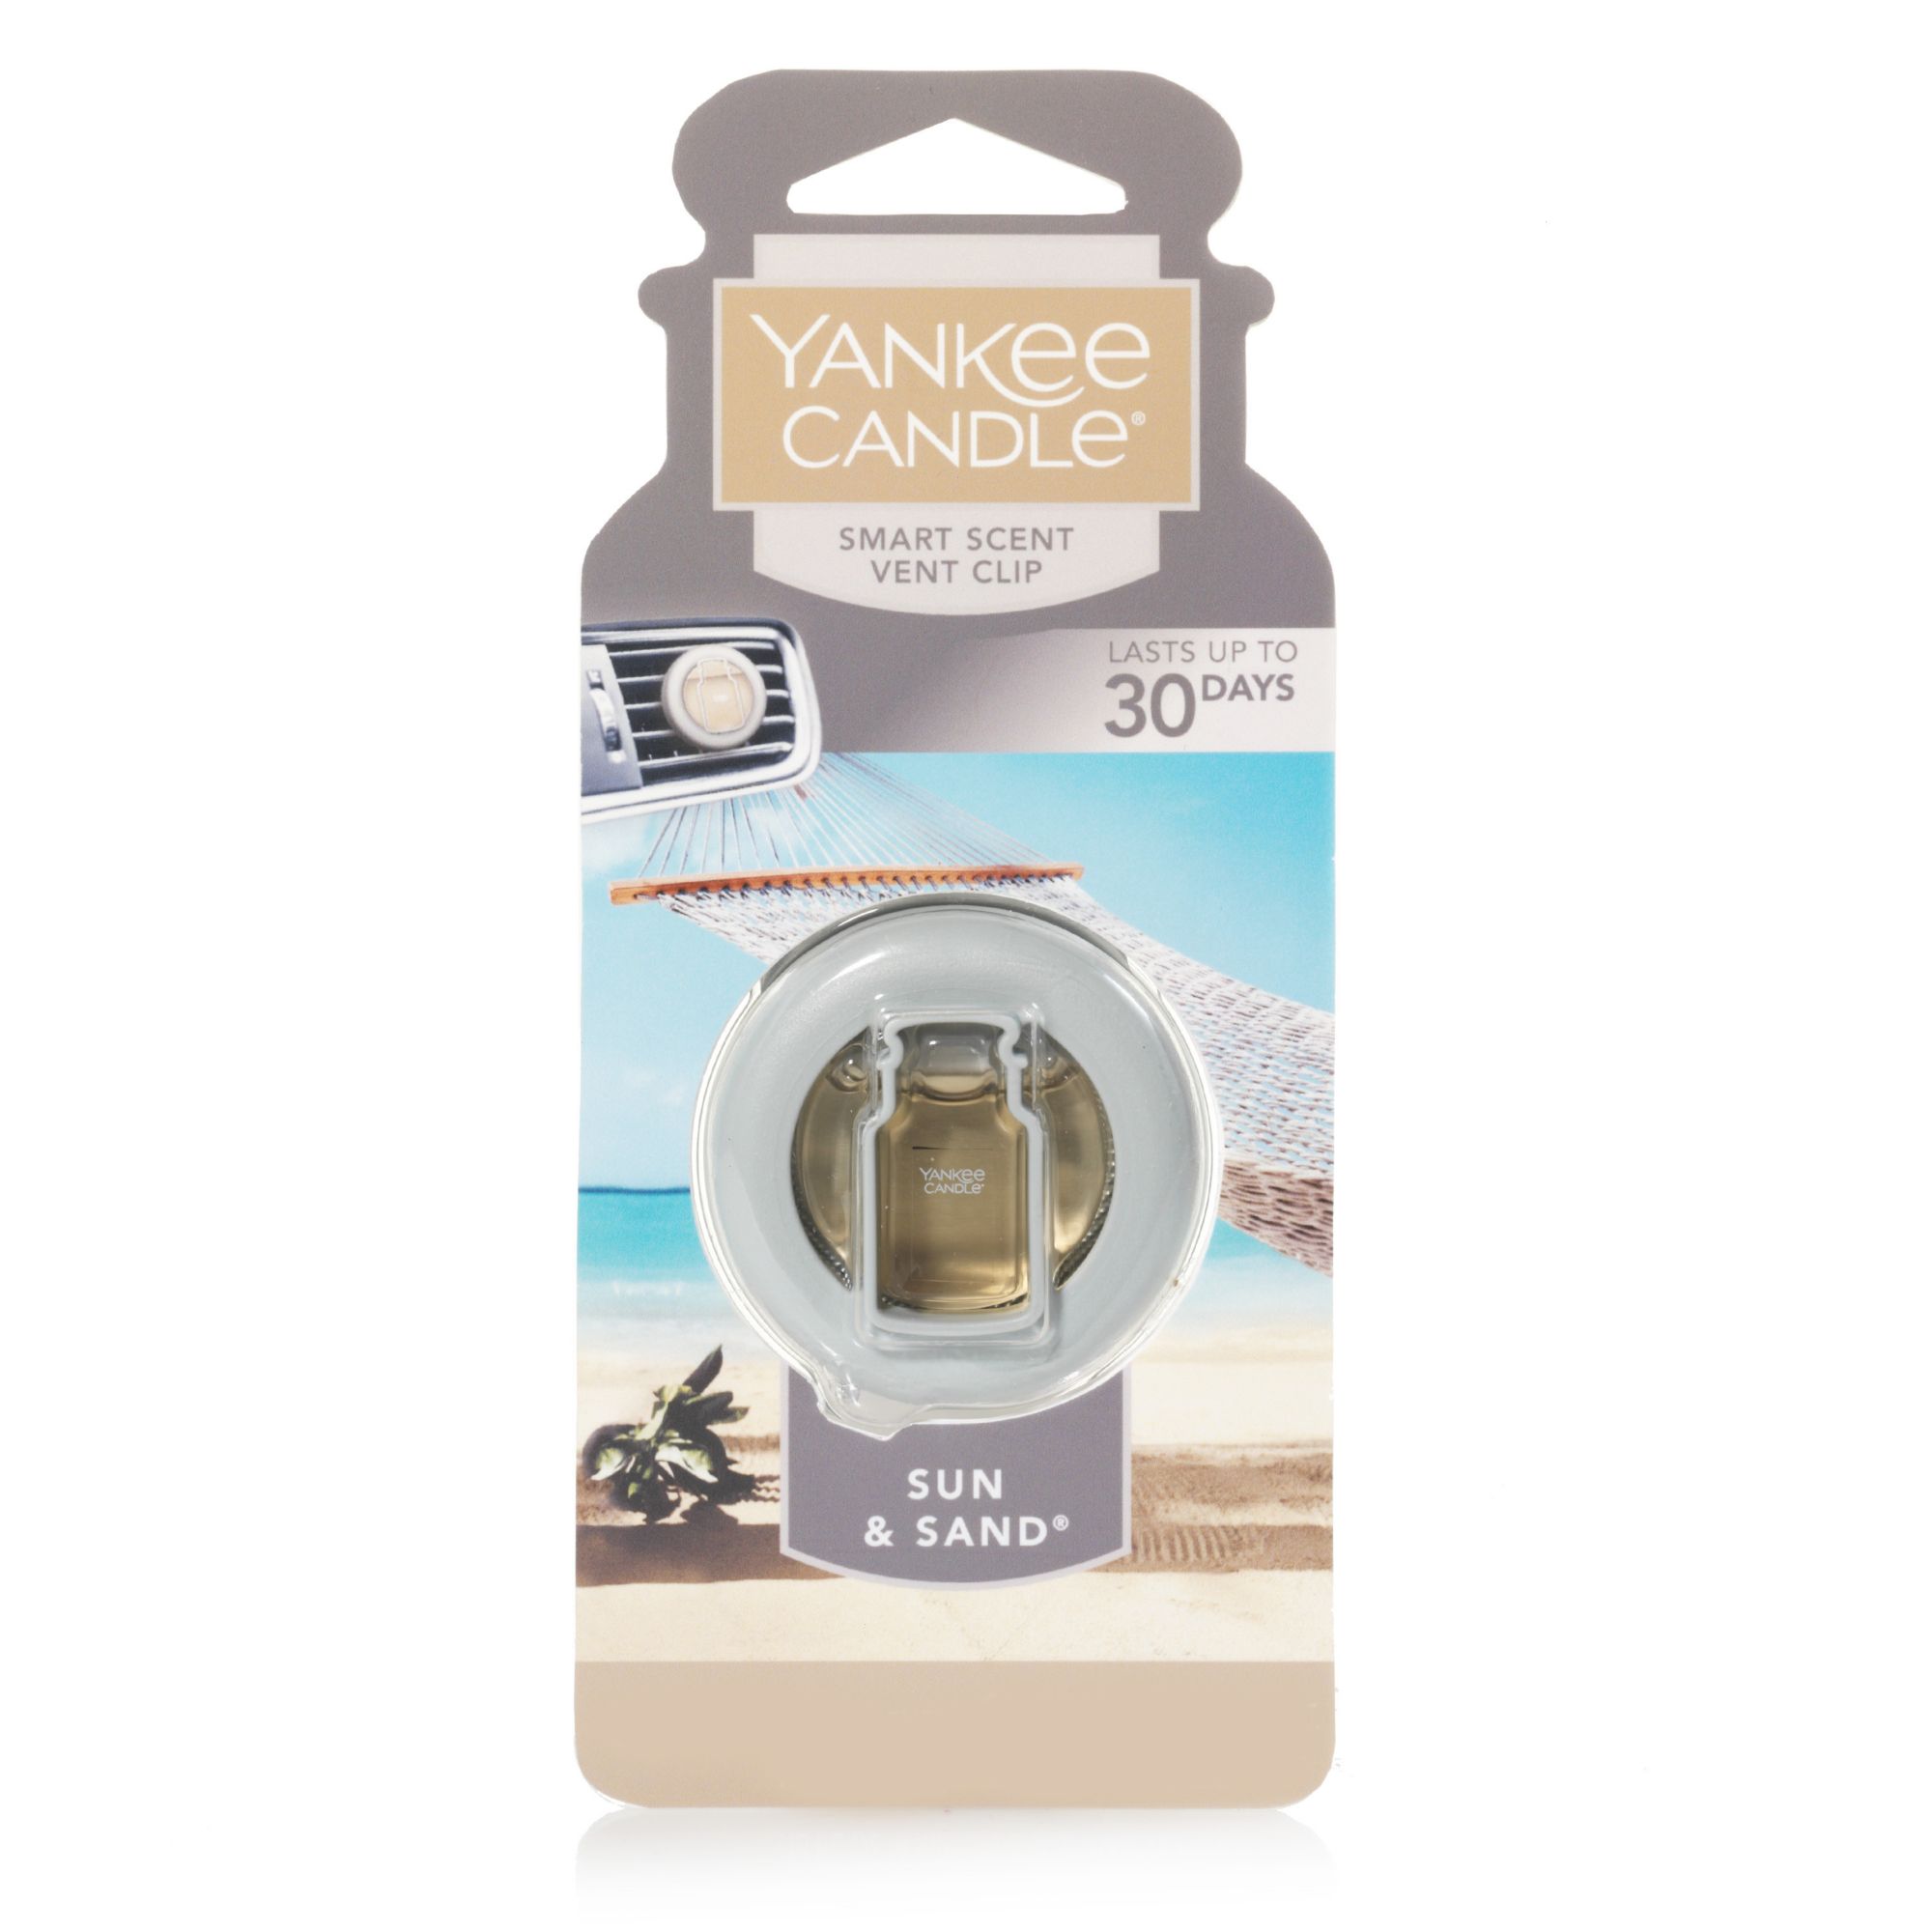 Yankee Candle Smart Scent Vent Clip - Sun & Sand